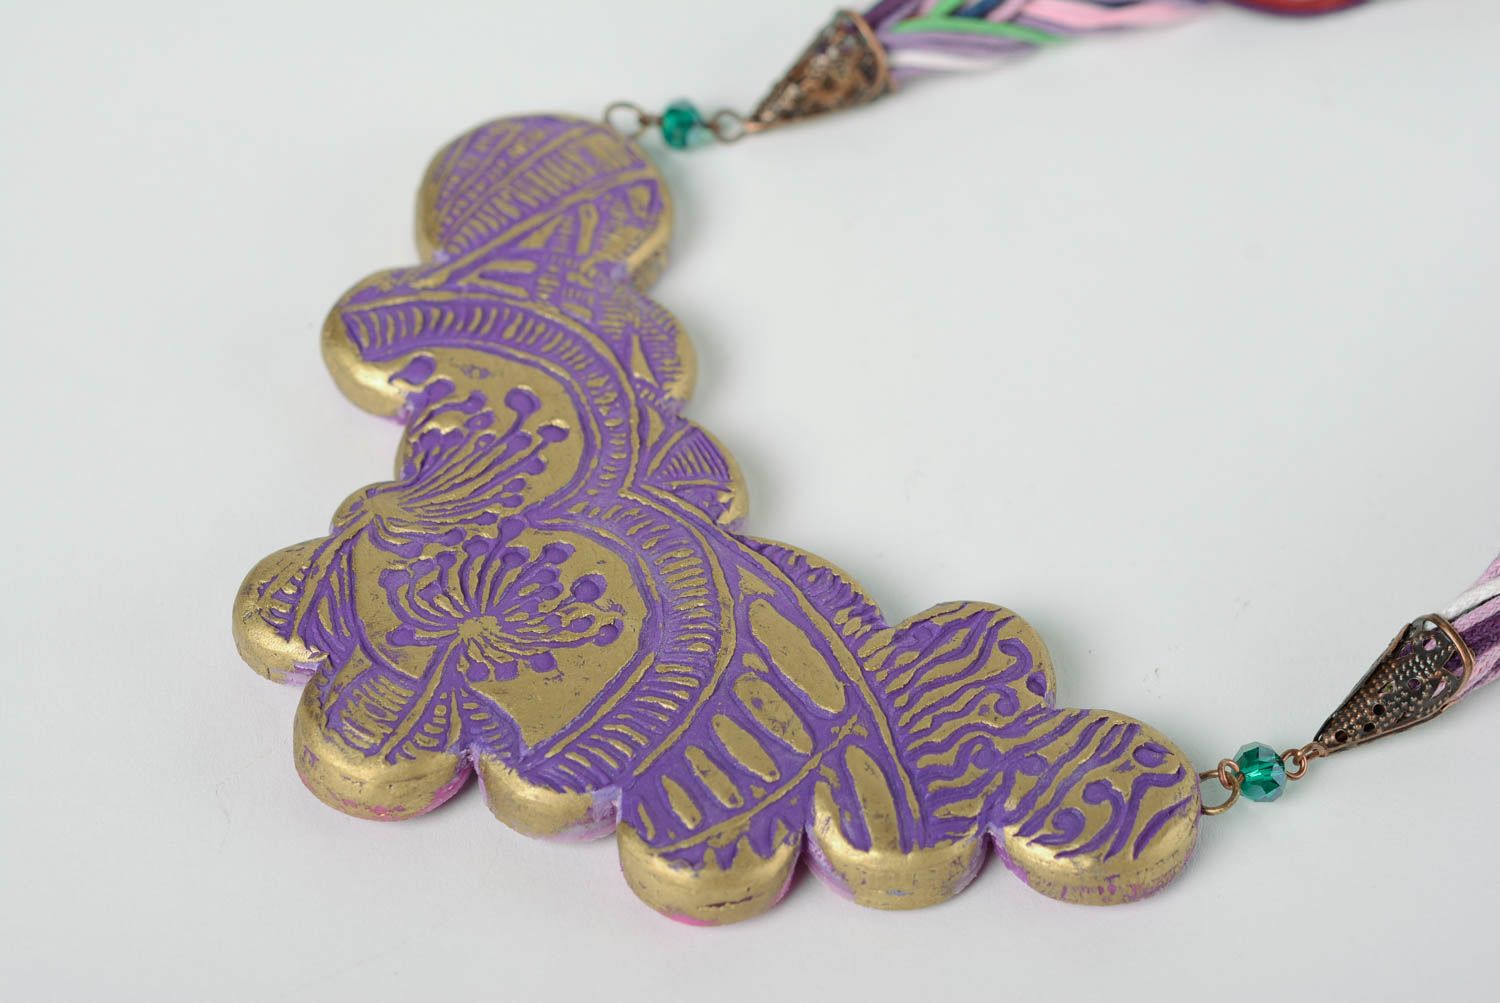 Handmade purple polymer clay necklace with cords Torn Edge photo 3